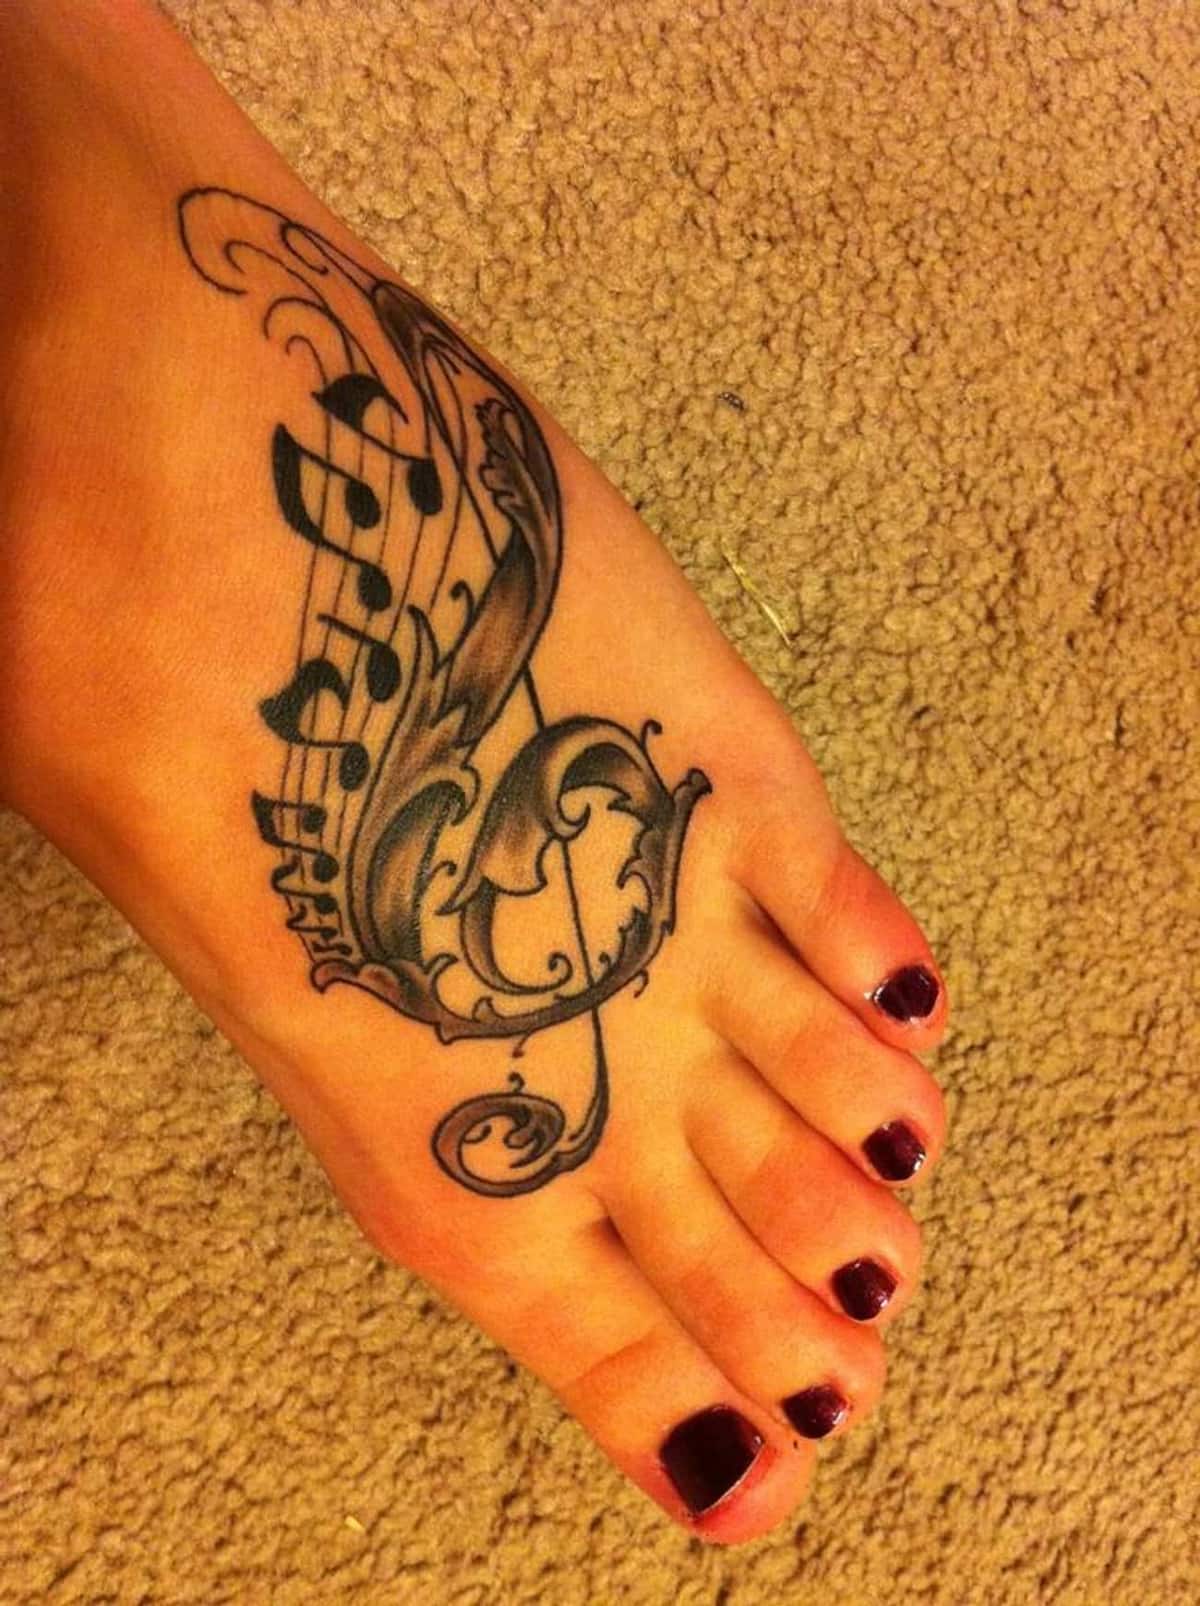 101 Awesome Guitar Tattoo Ideas You Need To See! | Guitar tattoo design, Guitar  tattoo, Music tattoo designs